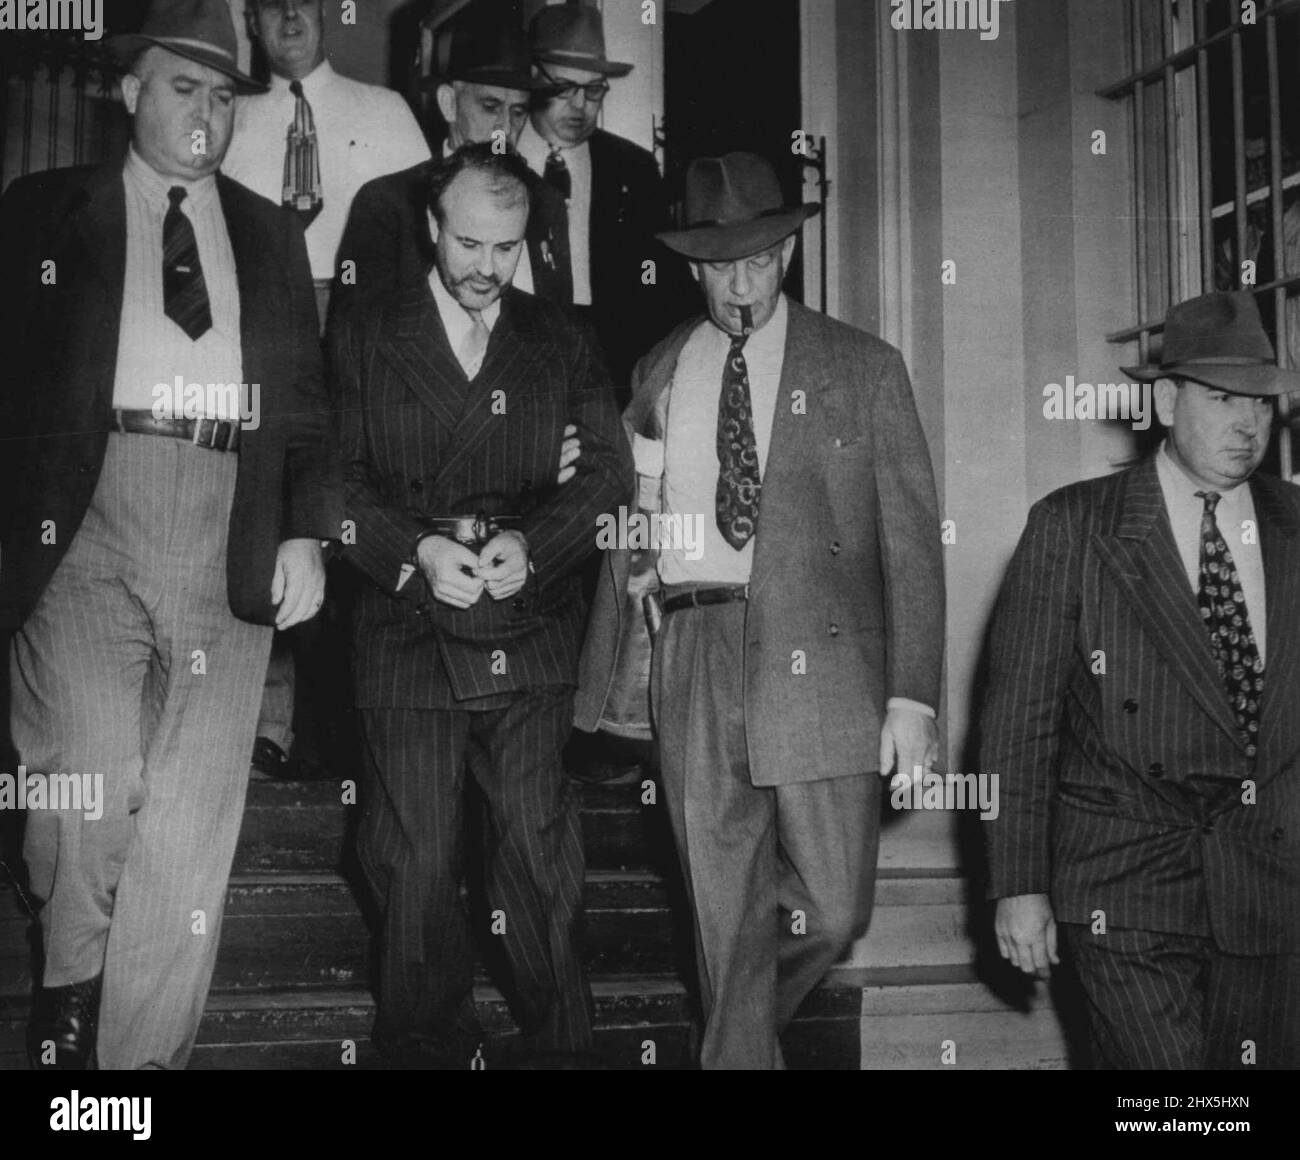 To Prison -- Earl Bircham (handcuffed) leaves courtroom today after sentencing to electric chair for slaying patrol man John Tennyson. Bircham is surrounded by detectives and sheriff's deputies who took him to state prison at Eddyville. October 22, 1949. (Photo by AP Wirephoto). Stock Photo